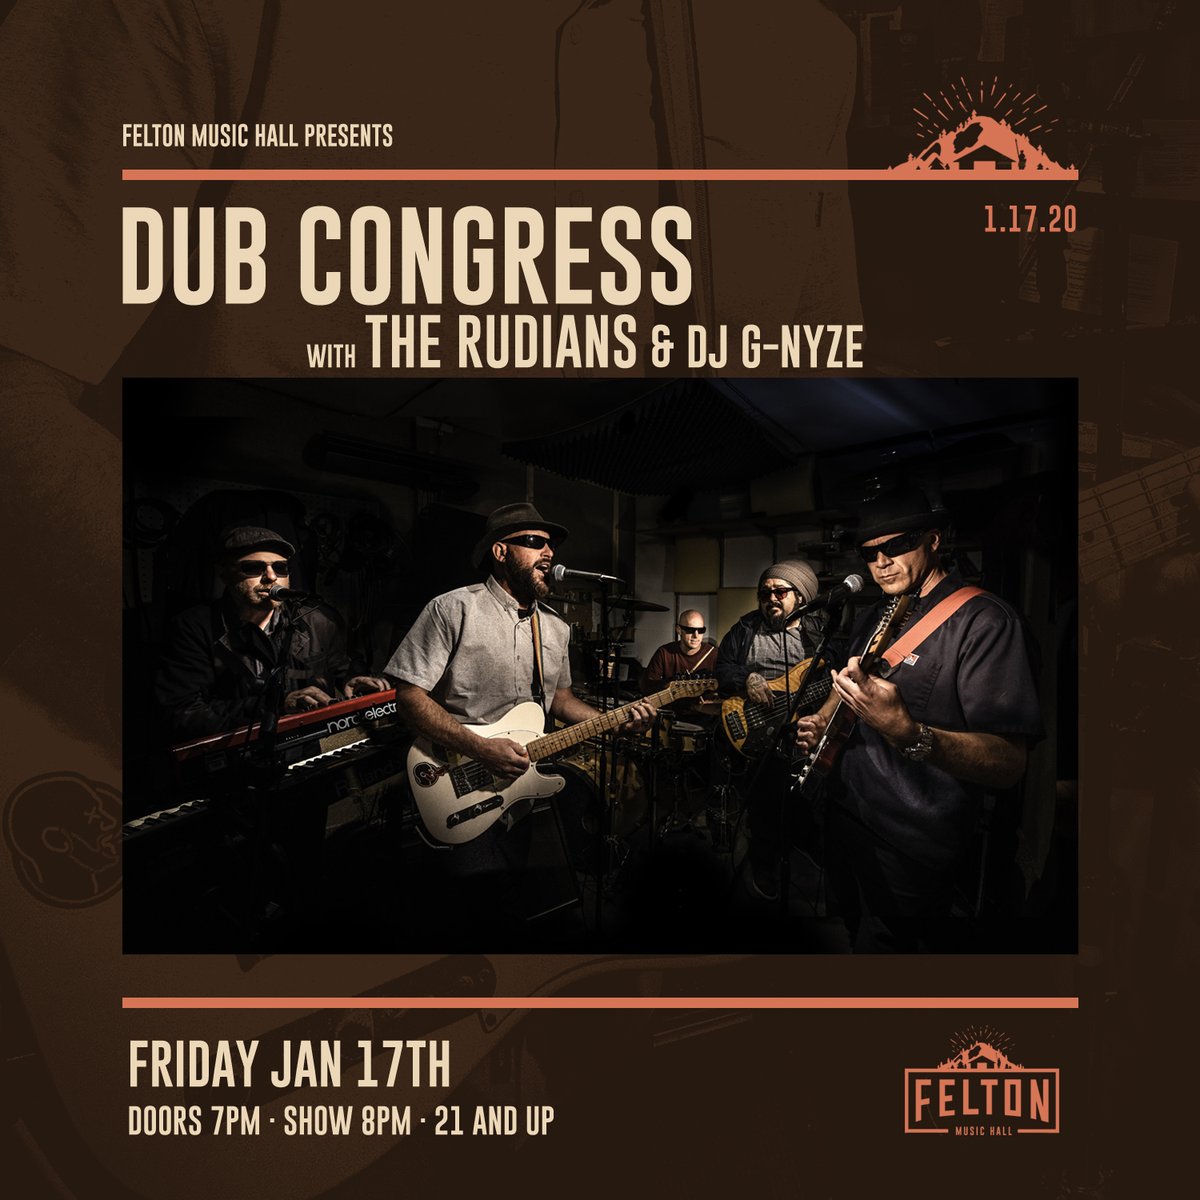 🎤TONIGHT🎤 Join @dubcongres, @therudians, & @djgnyze for a night of high-energy reggae tunes!! Show starts at 8p, 21+🔥🔥